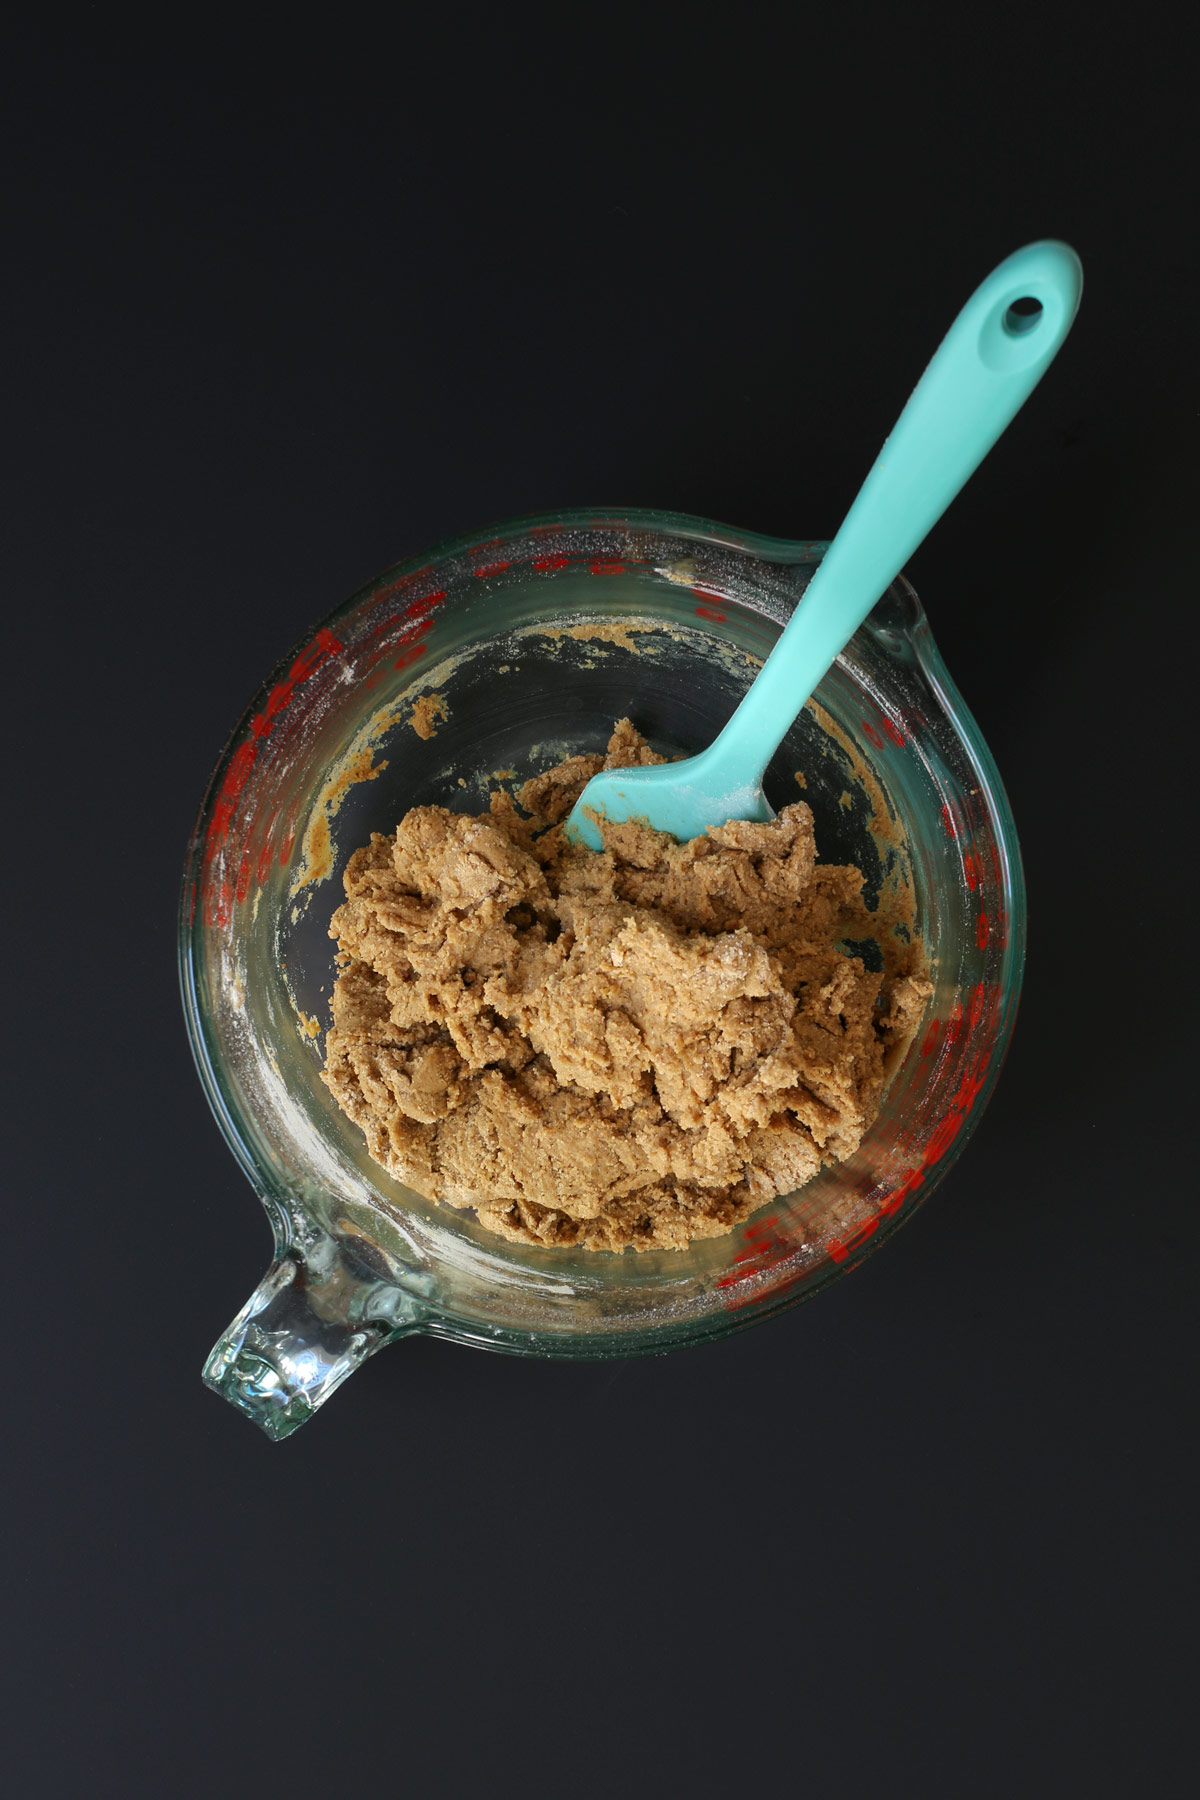 a teal rubber spatula immersed in the molasses cookie dough in the pyrex bowl.